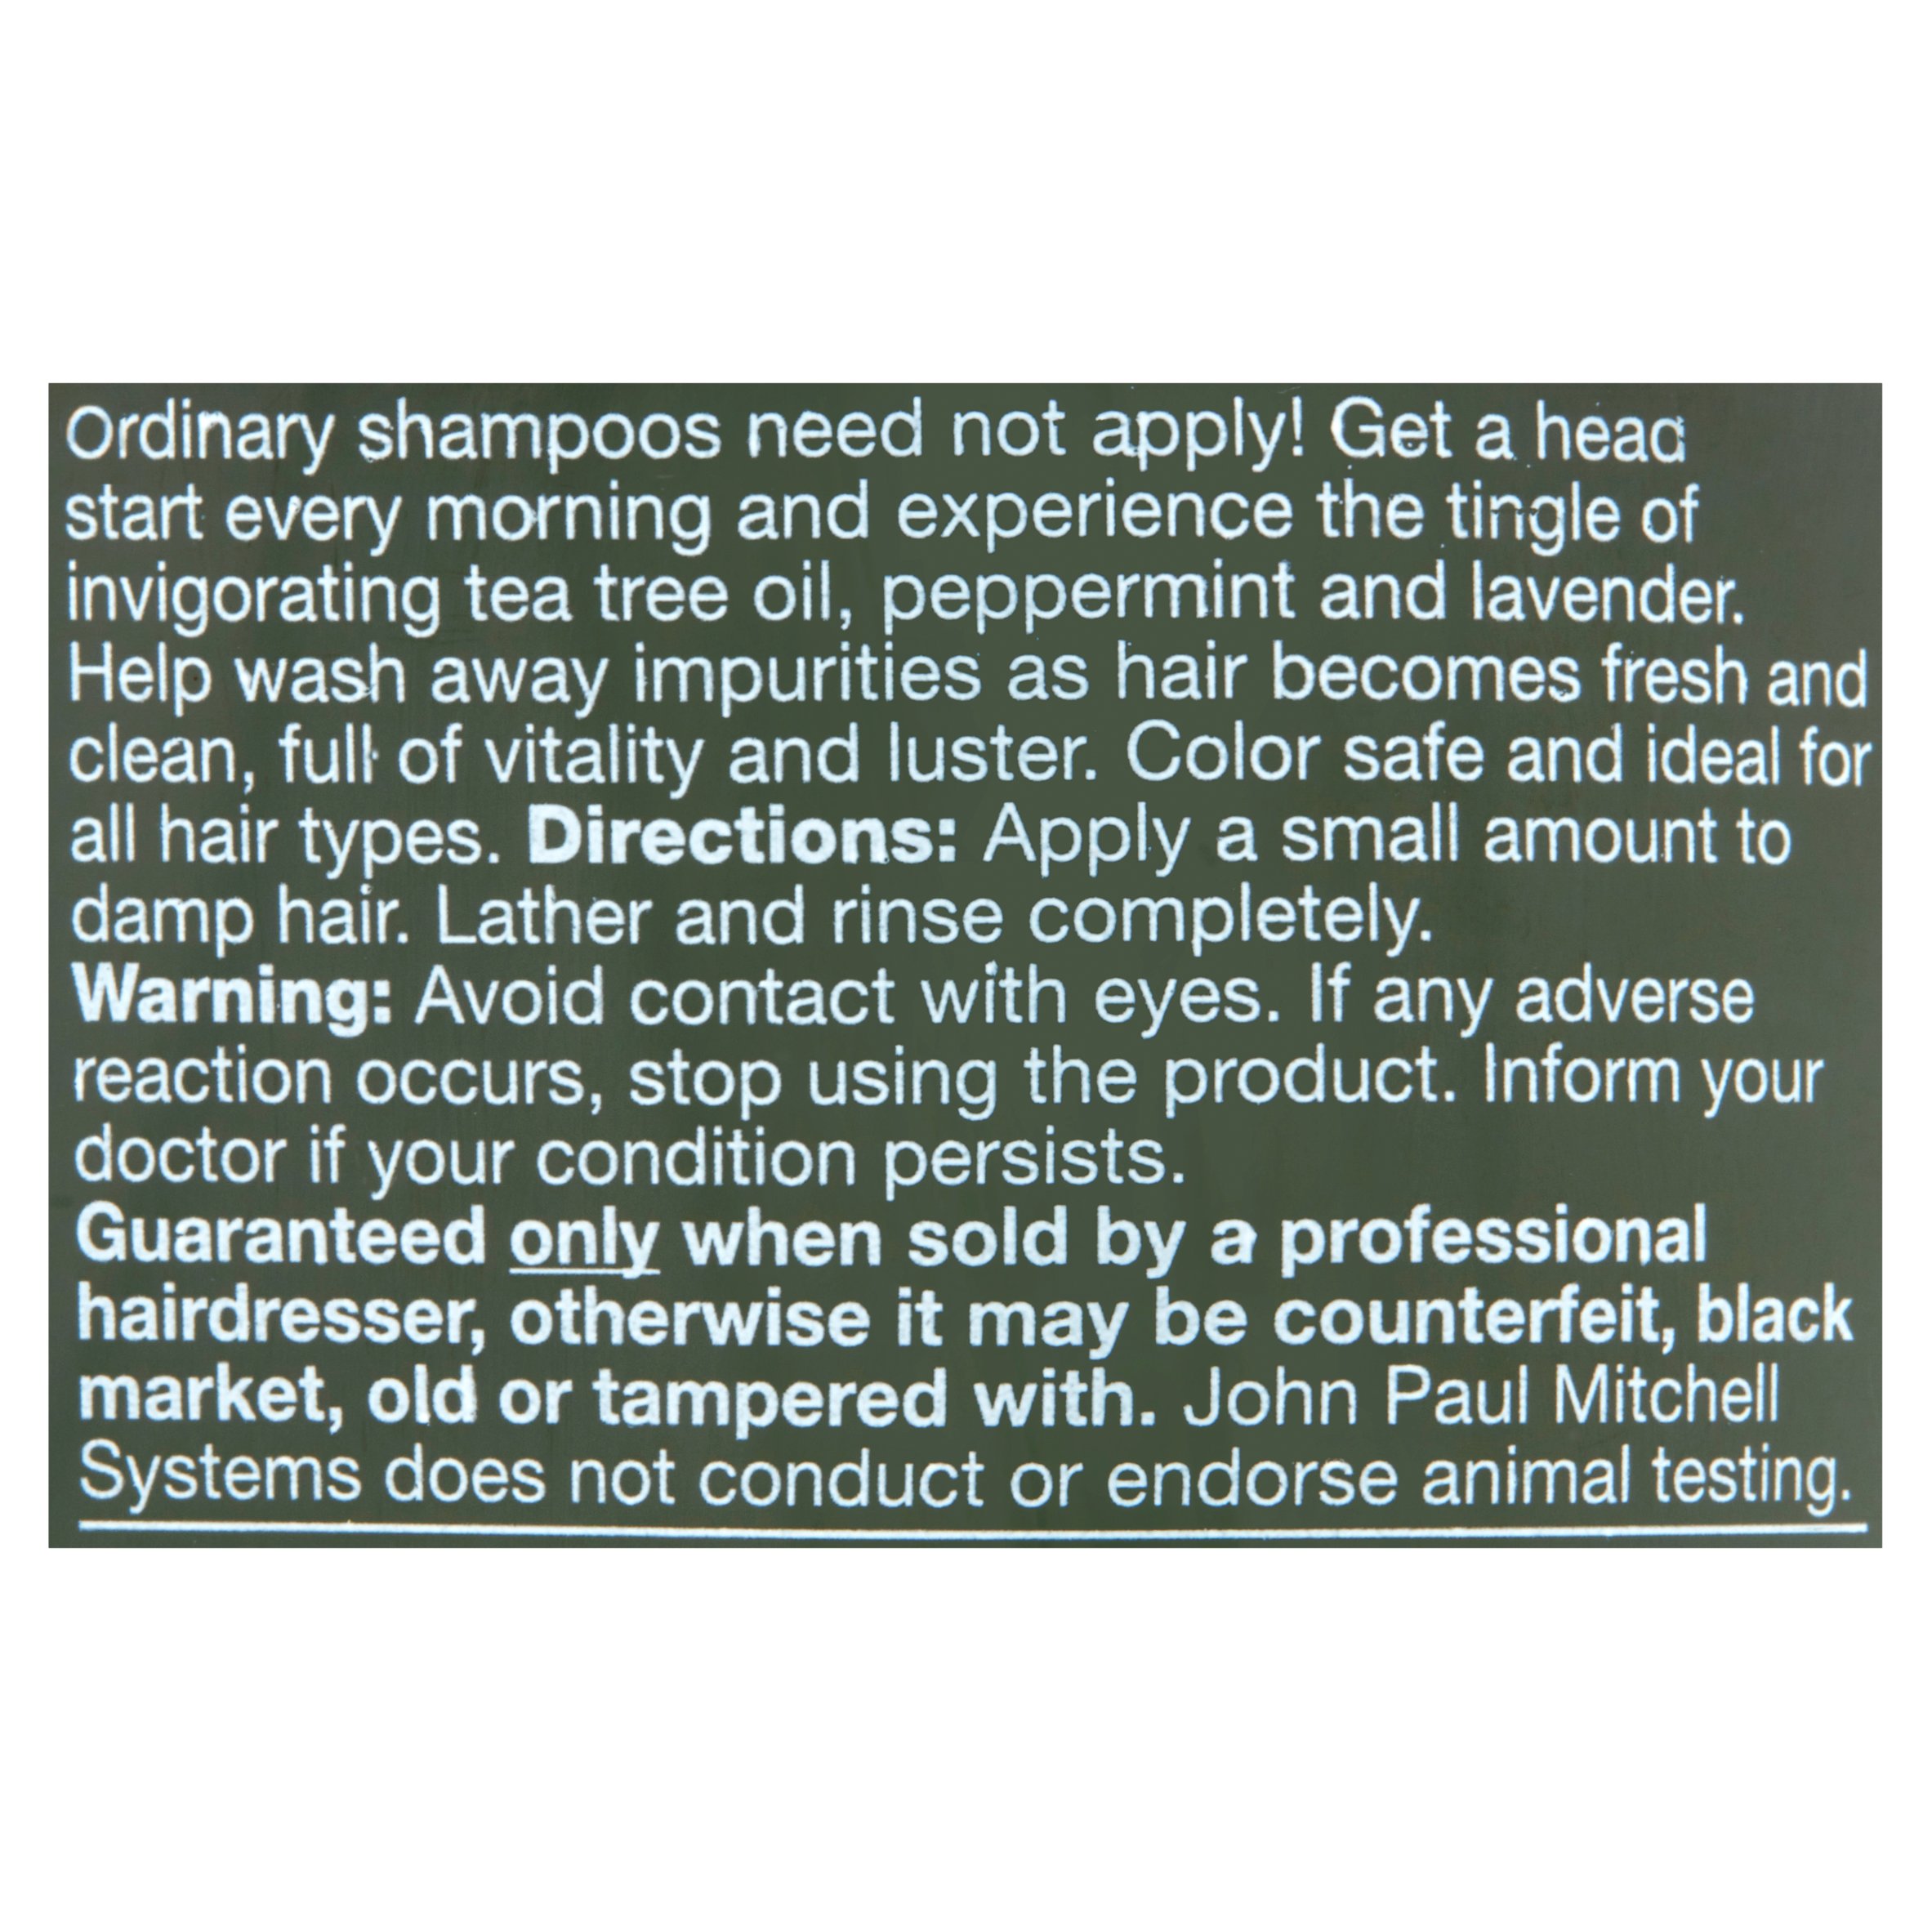 Paul Mitchell Tea Tree Special Clarifying Daily Shampoo with Peppermint & Lavender, 16.9 fl oz - image 4 of 4